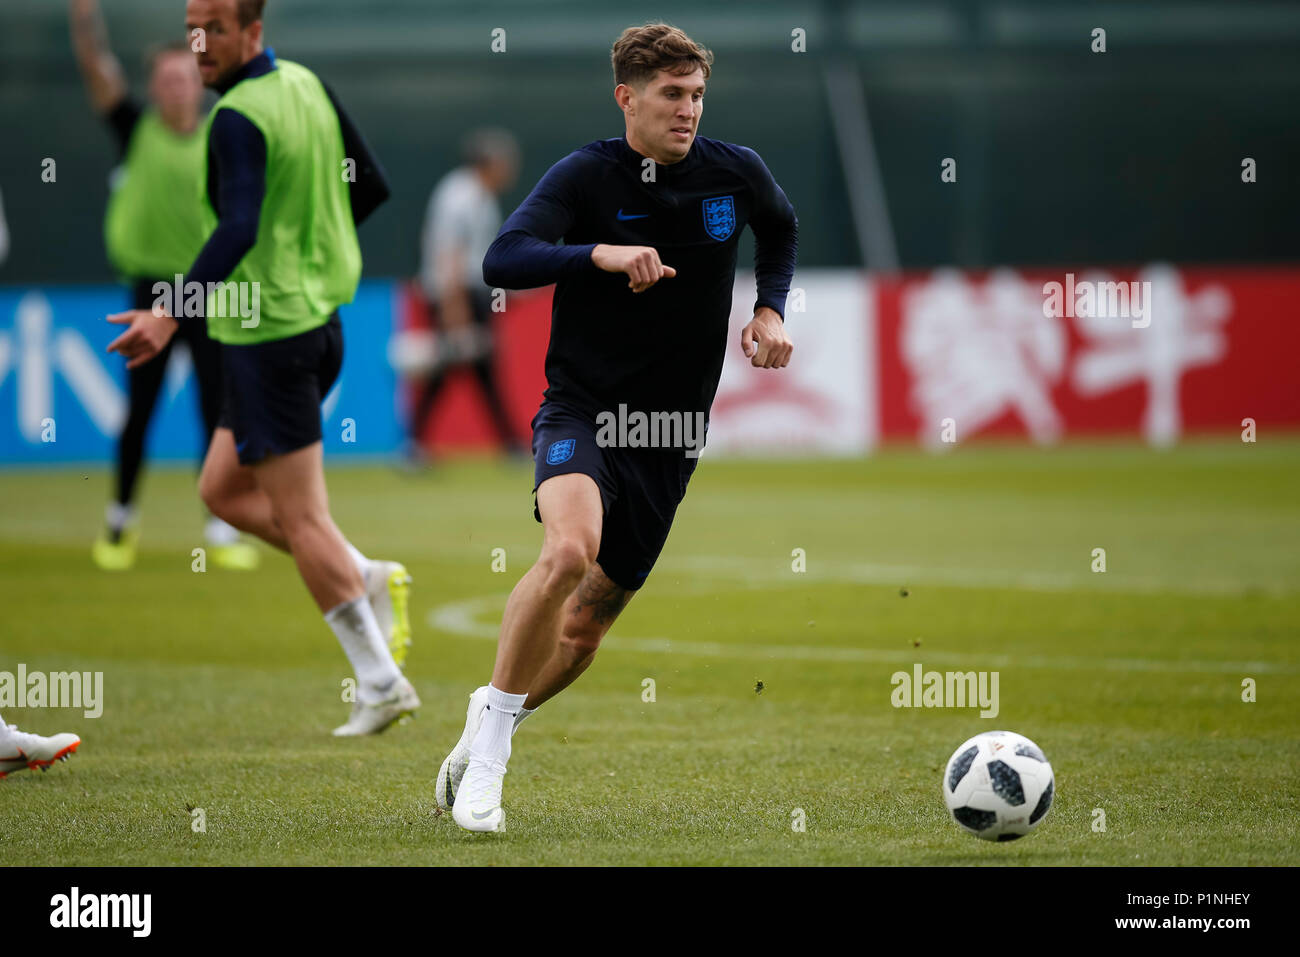 St Petersburg, Russia, 13th June 2018. John Stones of England during an England training session at Stadium Spartak Zelenogorsk on June 13th 2018 in Zelenogorsk, Saint Petersburg, Russia. (Photo by Daniel Chesterton/phcimages.com) Credit: PHC Images/Alamy Live News Stock Photo